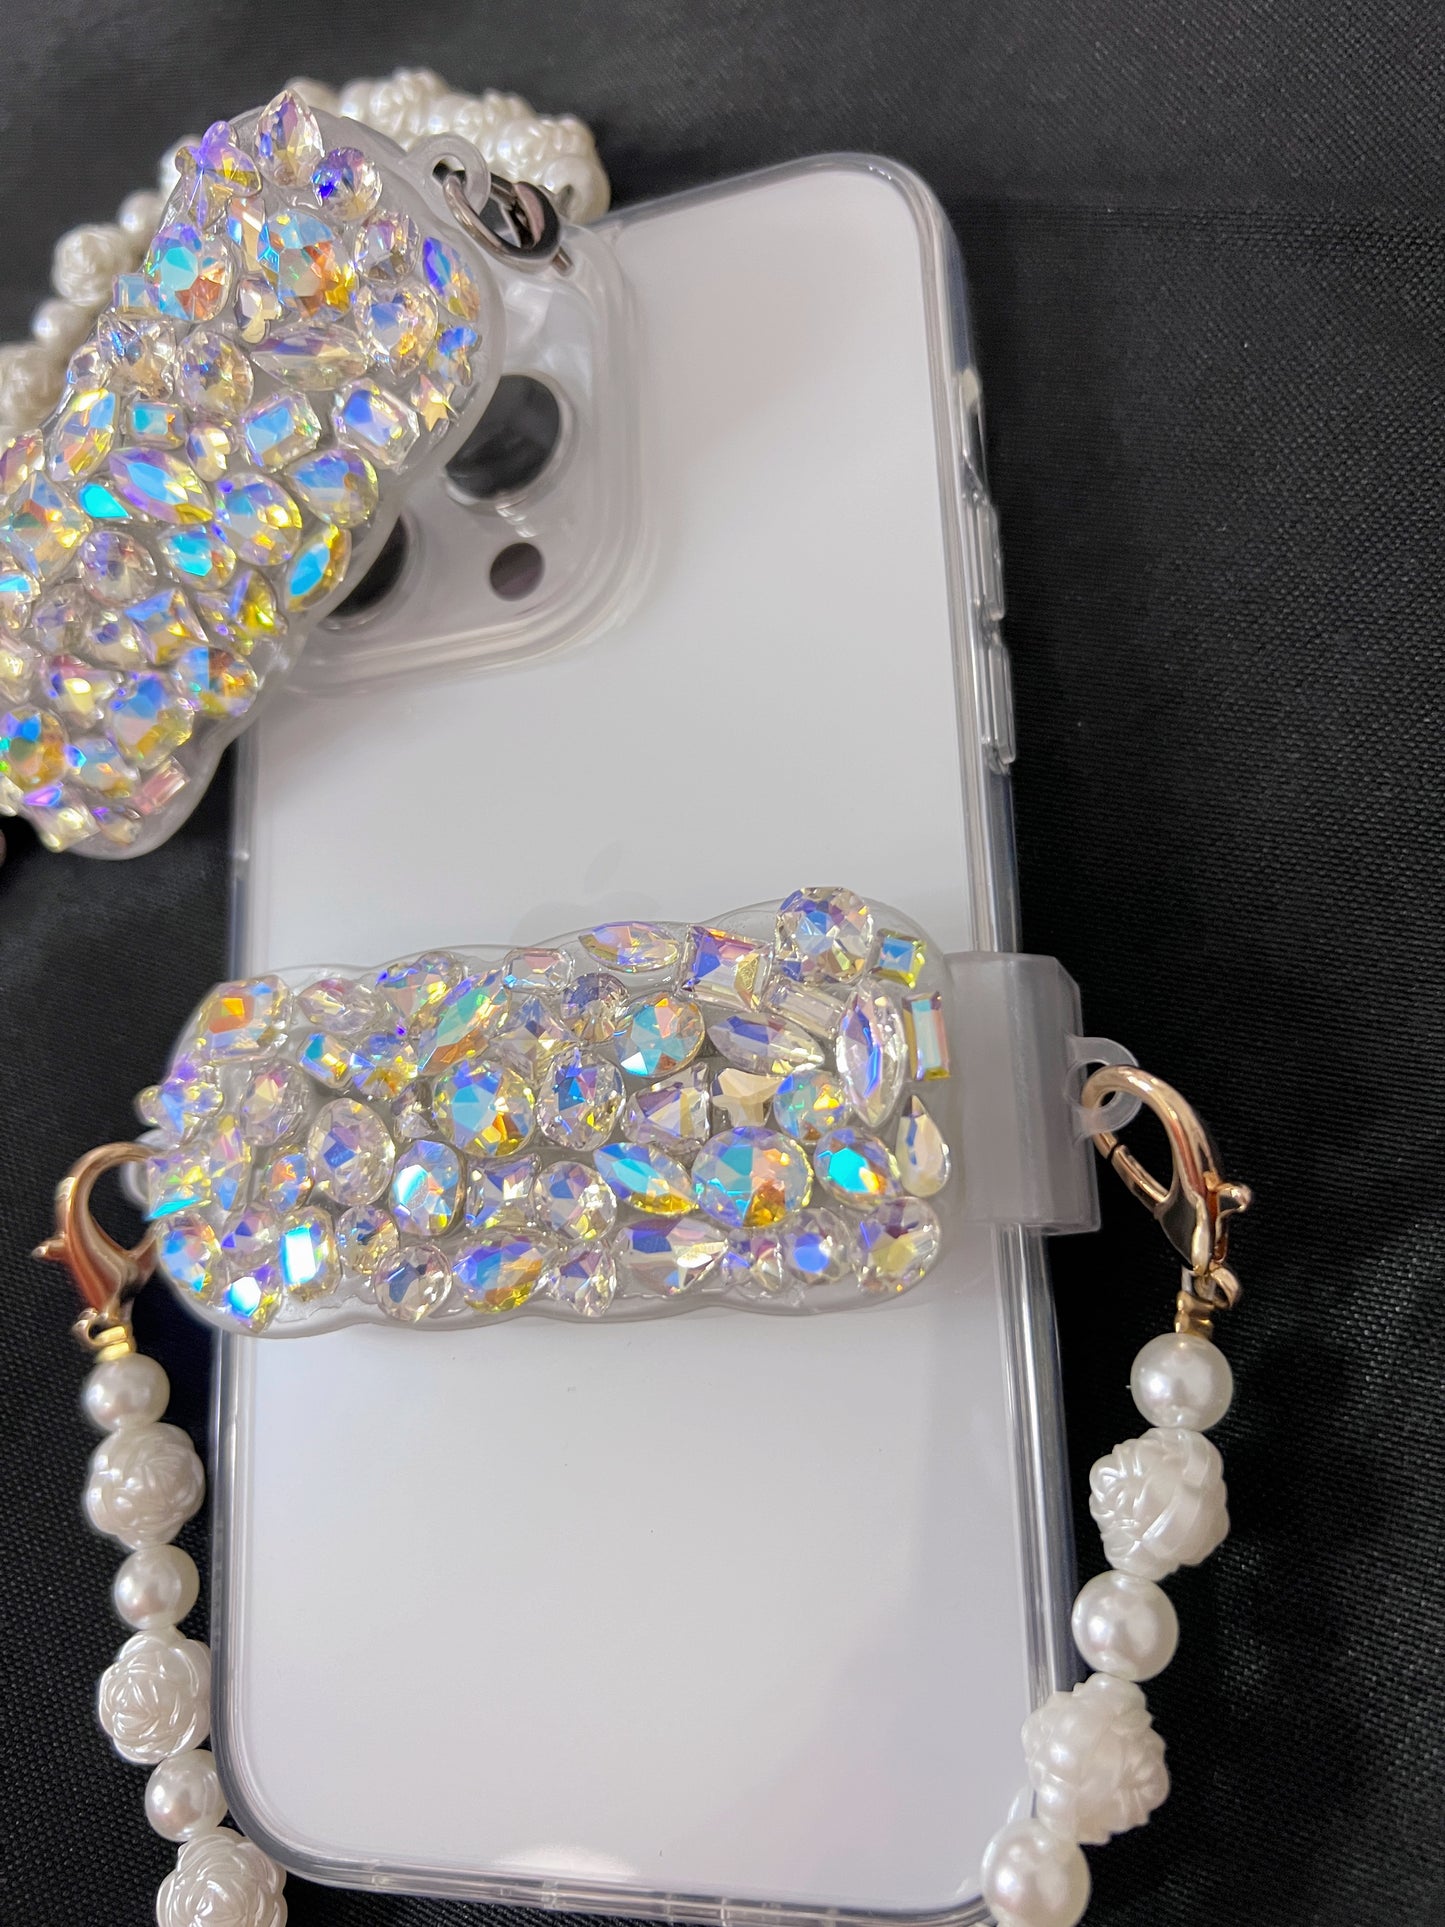 Diamond Whipped cream phone clip holder,Phone Holder with Chain,Futuristic Phone Accessories,fit all regular-sized phone Active